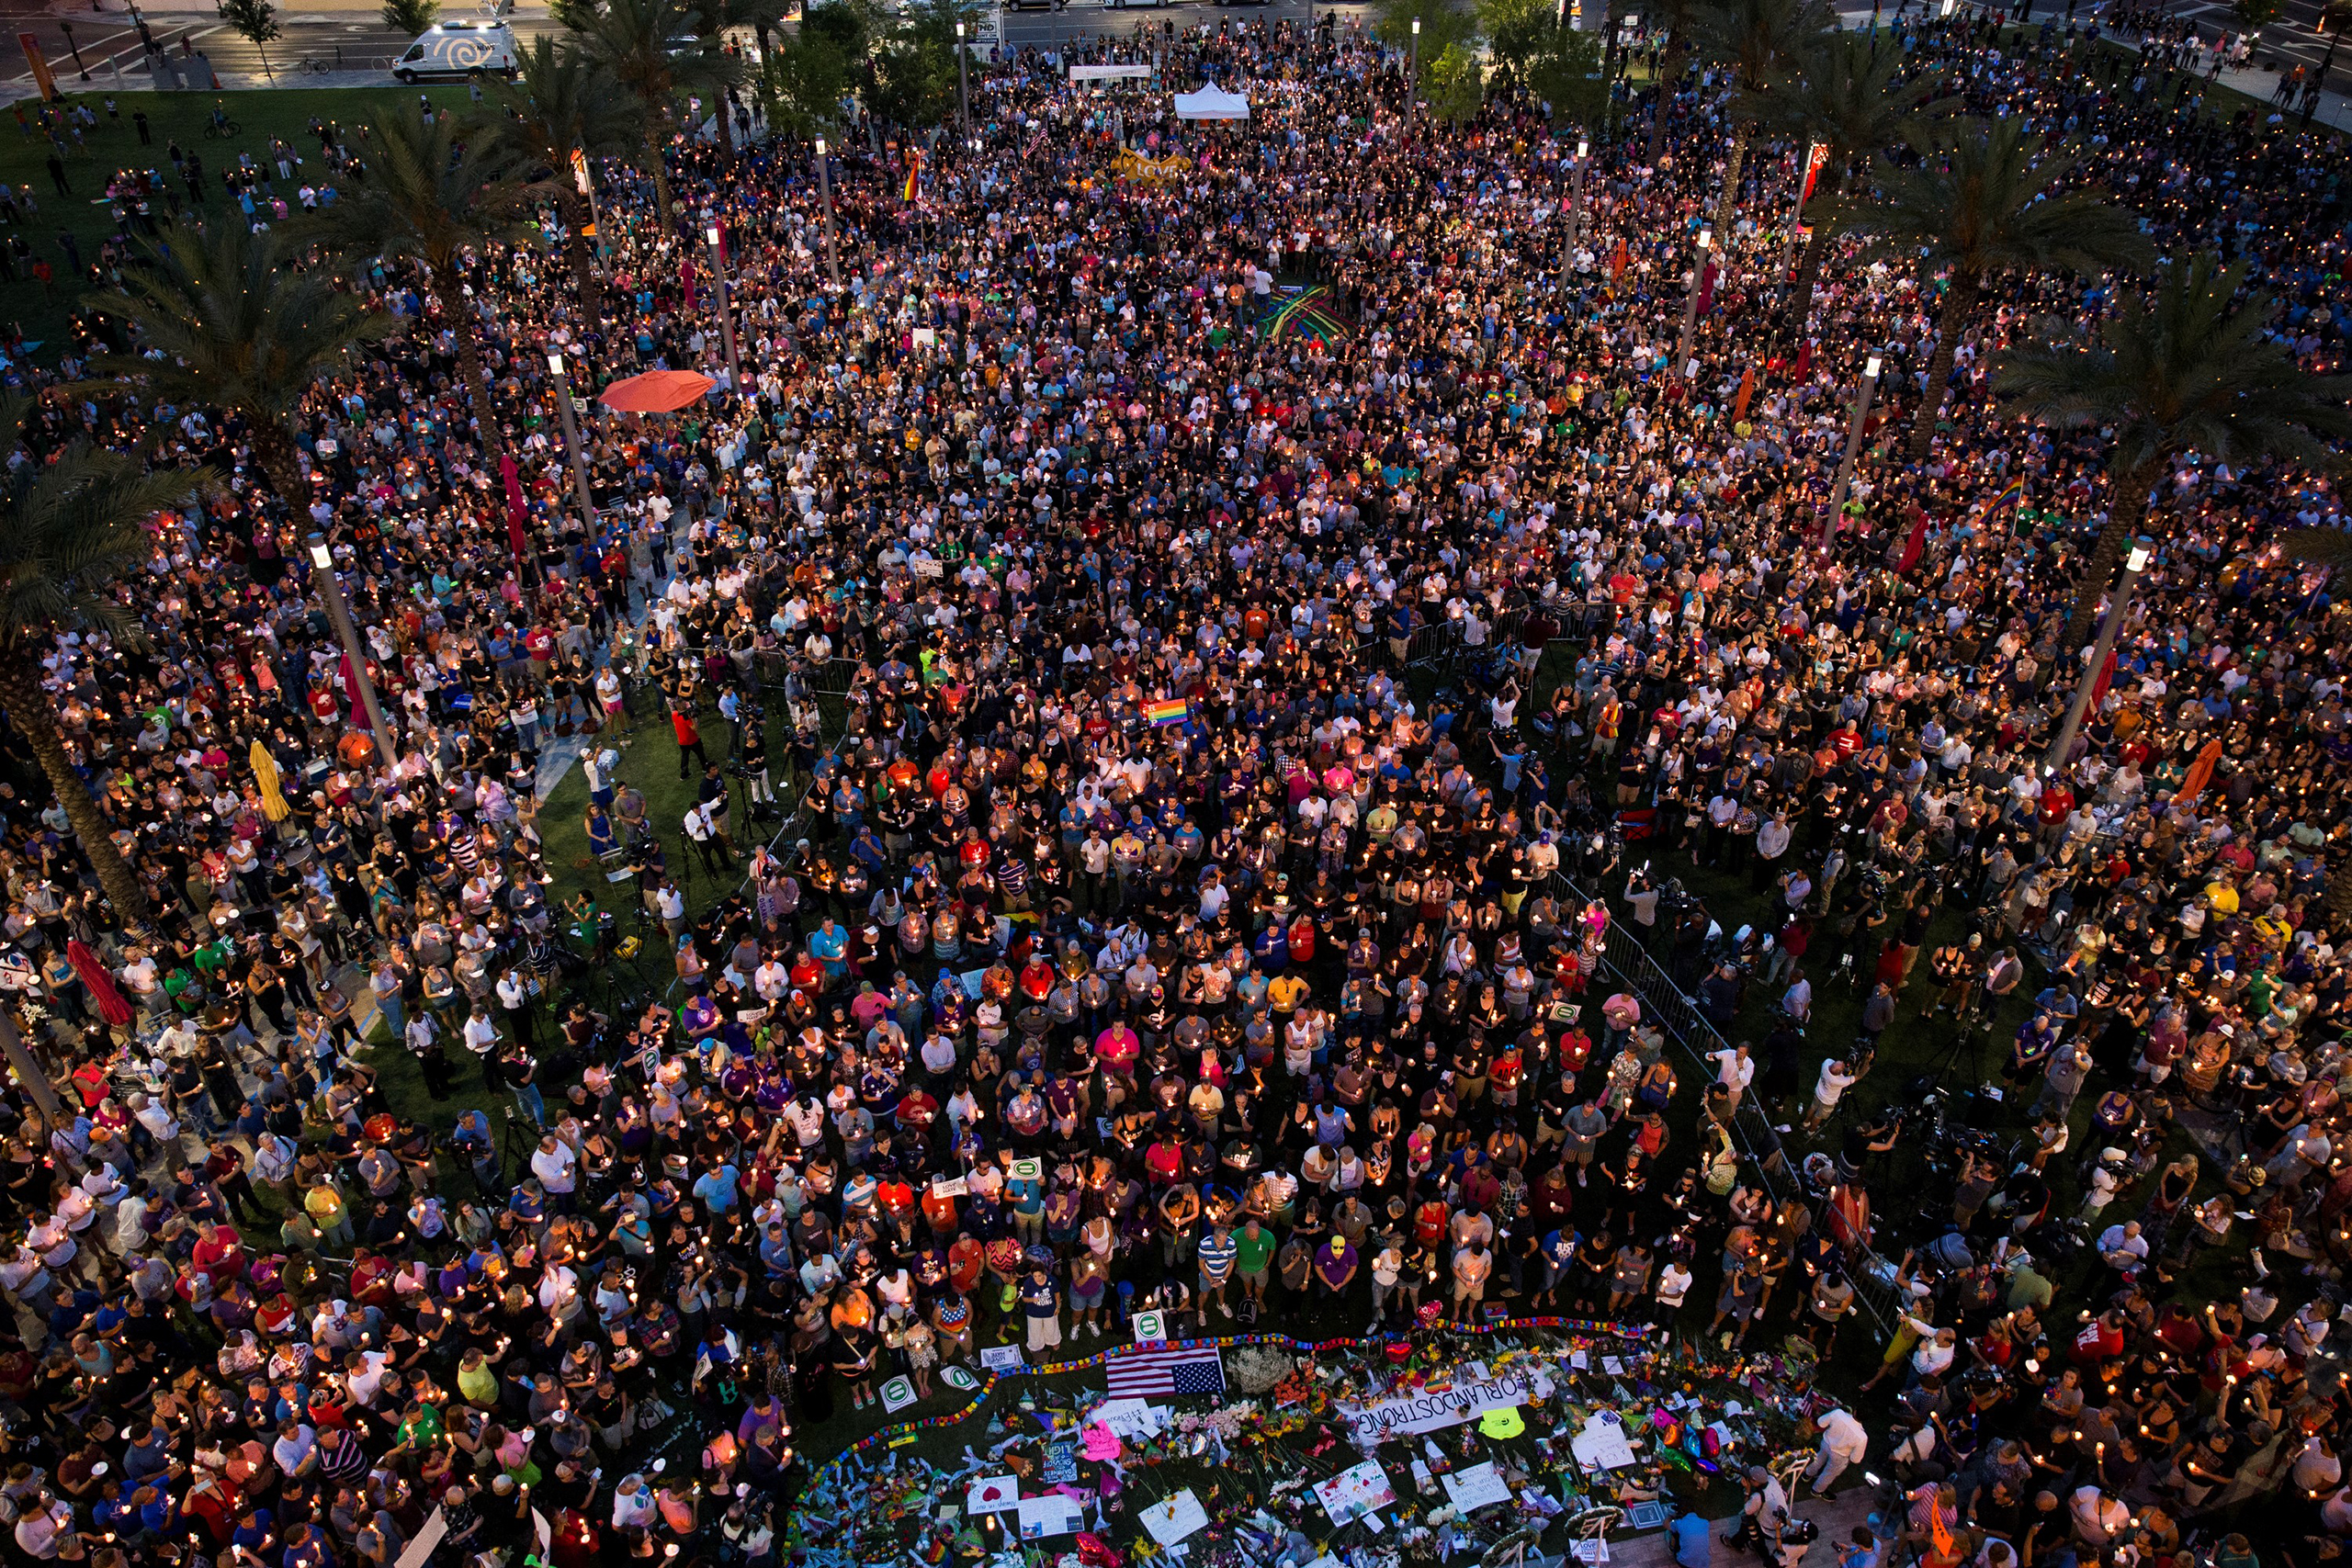 Thousands gather at the Dr. Phillips Center for the Performing Arts to pay their respects for those lost in the Pulse nightclub shooting in Orlando on June 13, 2016. 
                      
                      
                      Candlelight vigils and remembrances for the victims of the shooting at Pulse, a gay nightclub in Orlando, Florida. Early Sunday, an American-born man who had recently pledged allegiance to ISIS opened fire in the nightclub killing at least 49 people, in the worst mass shooting in U.S. history. (Samuel Corum—Anadolu Agency/Getty Images)